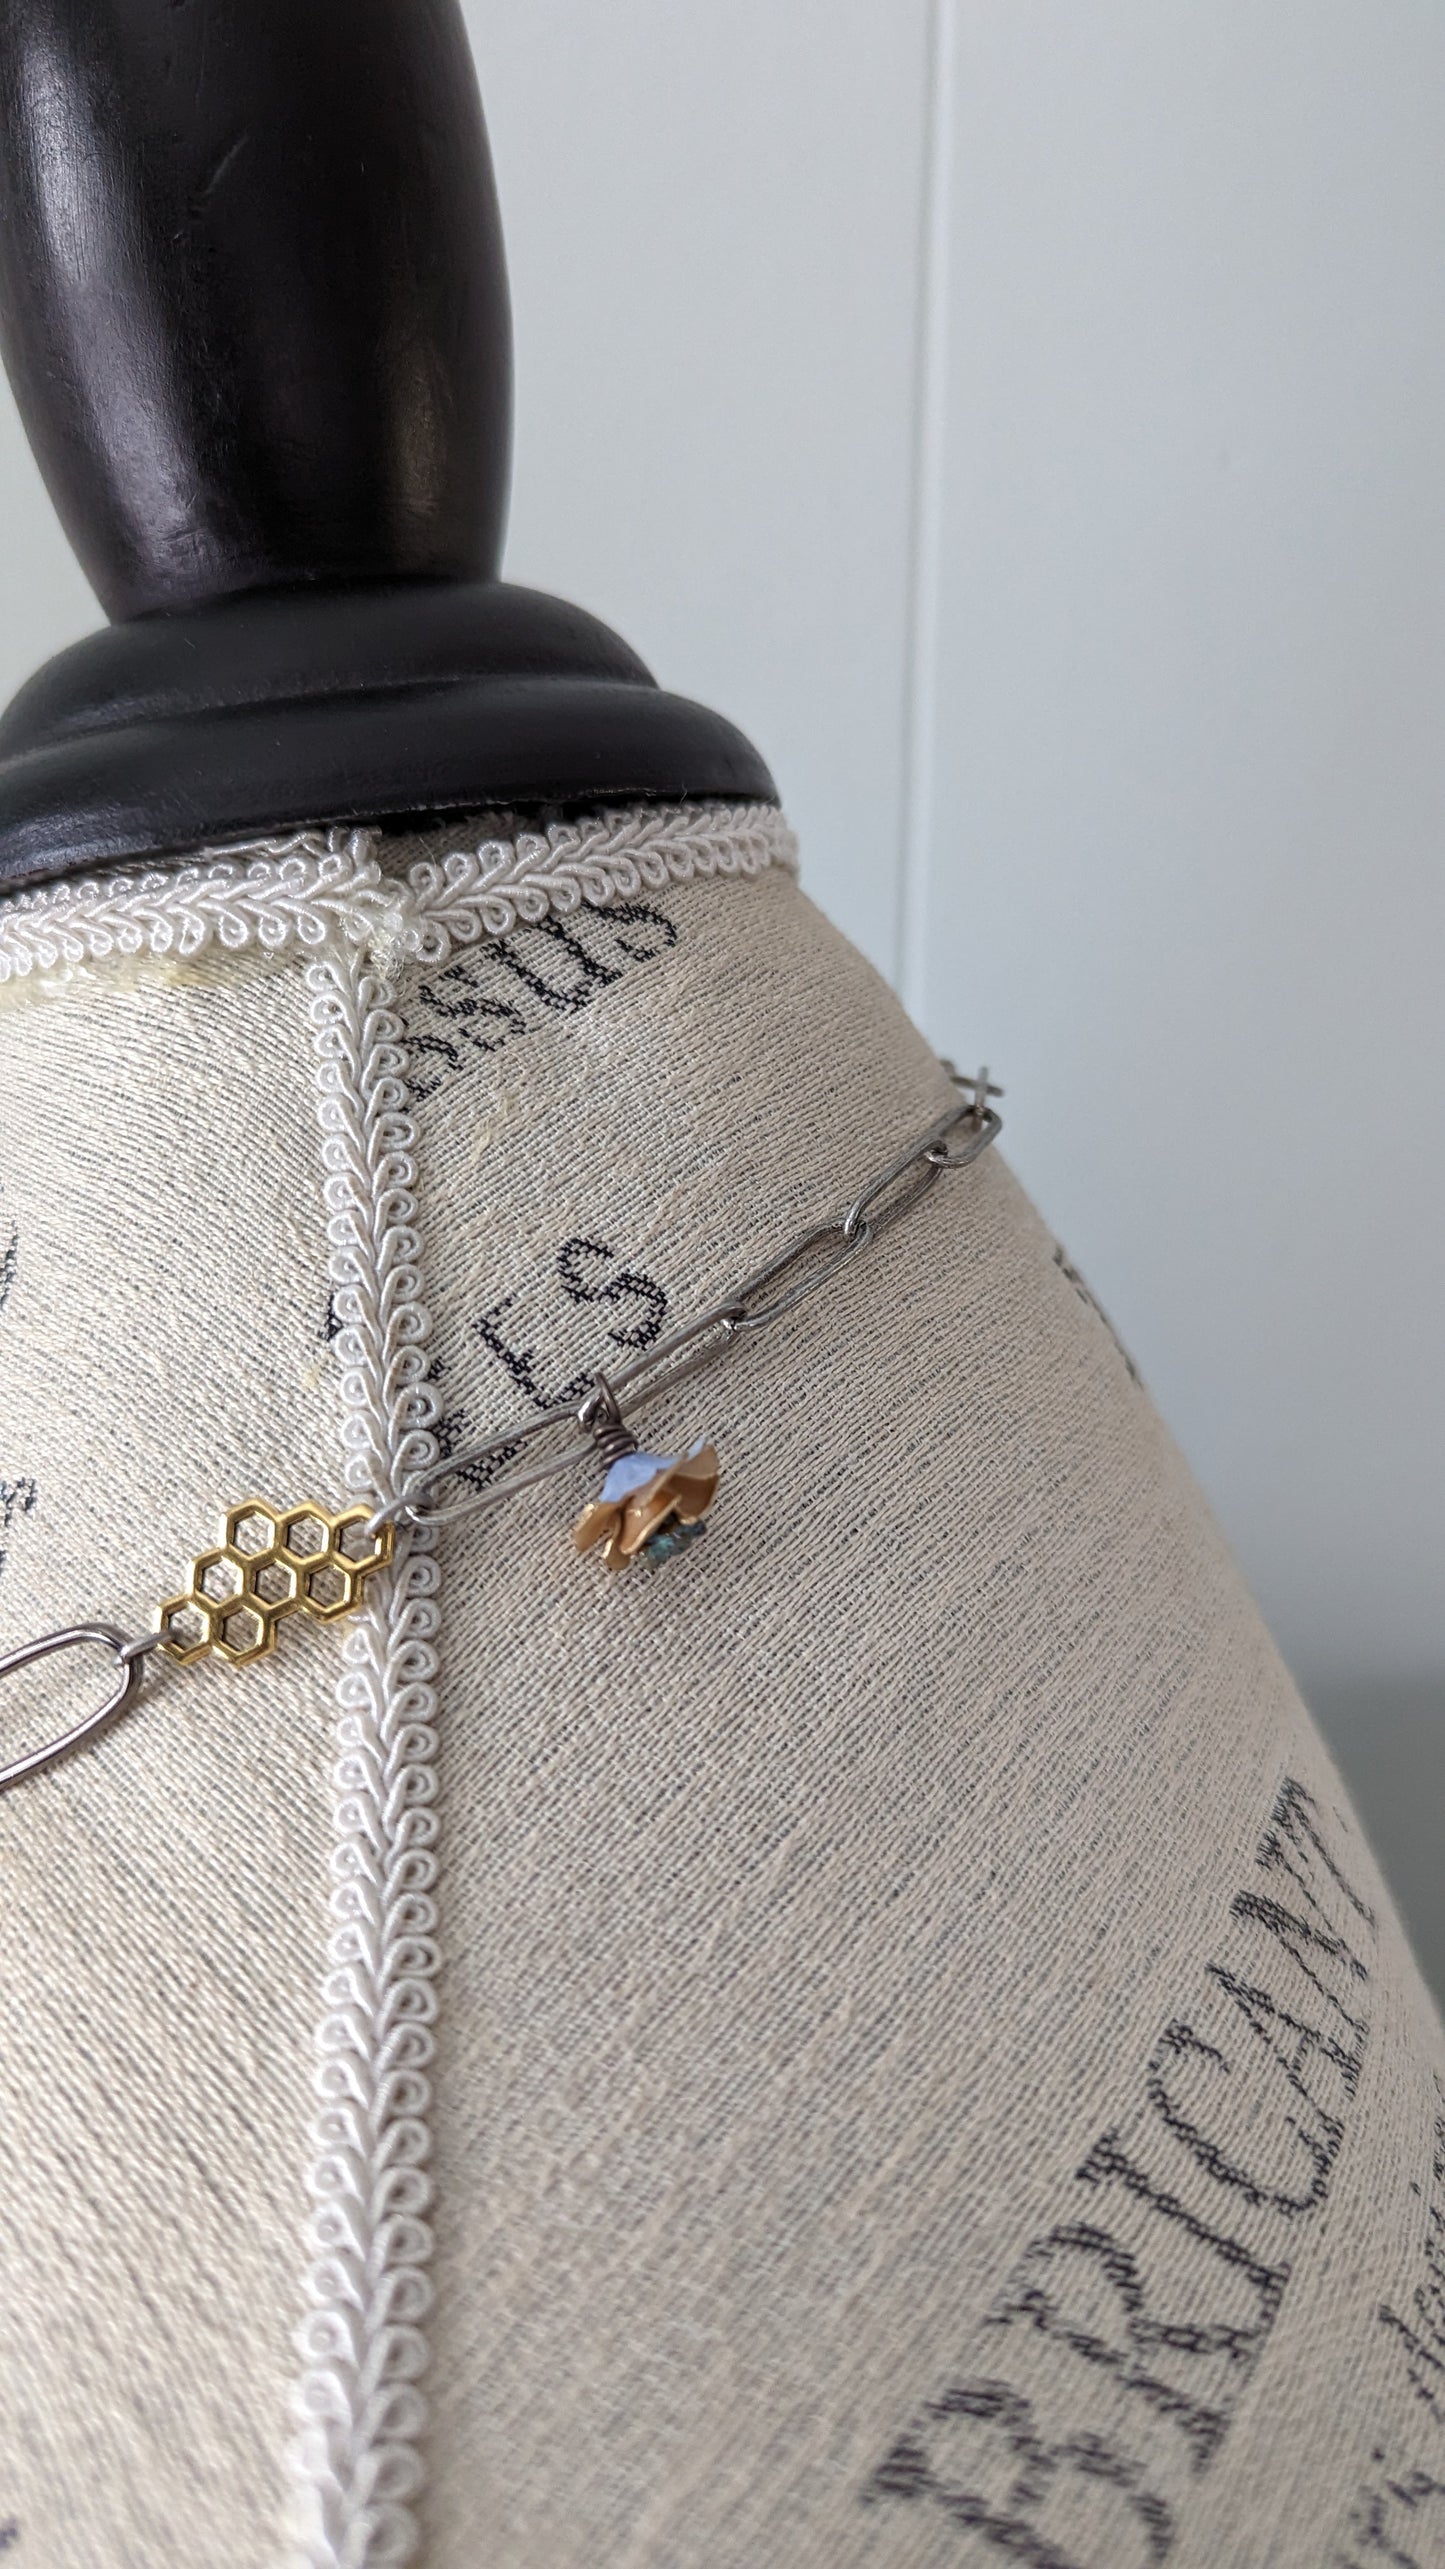 The Understated Collection Bee Necklace